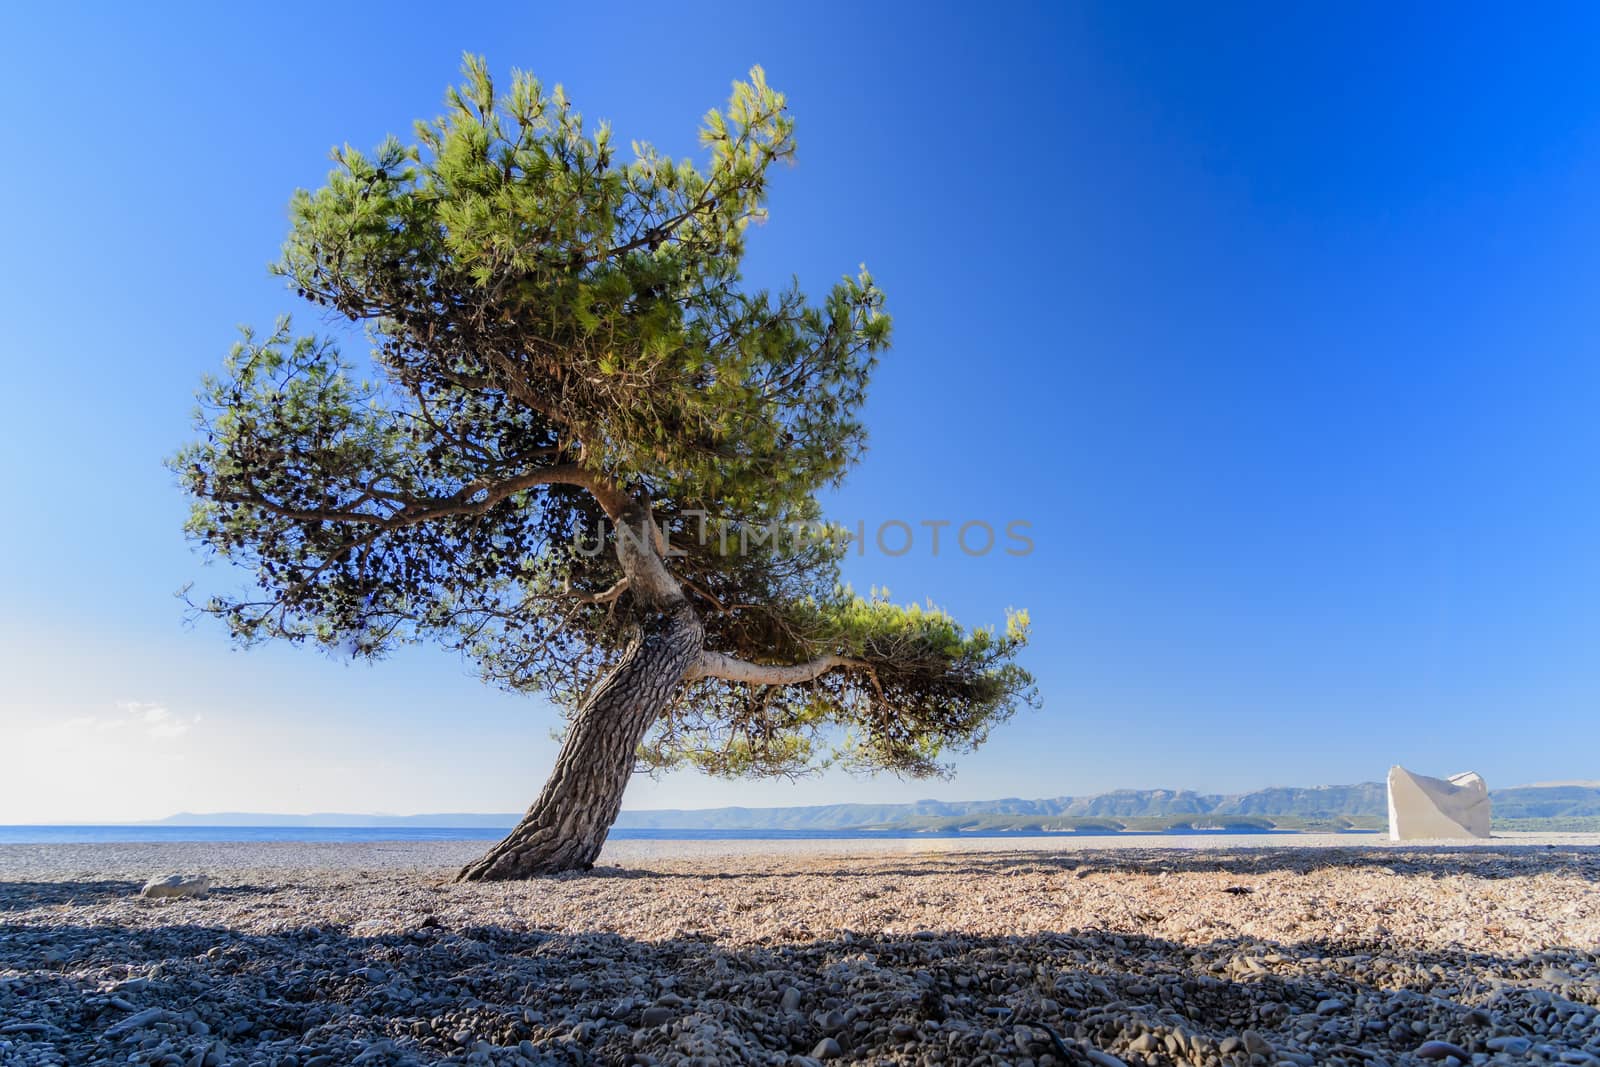 Single pine tree on beach against blue sky in background by asafaric